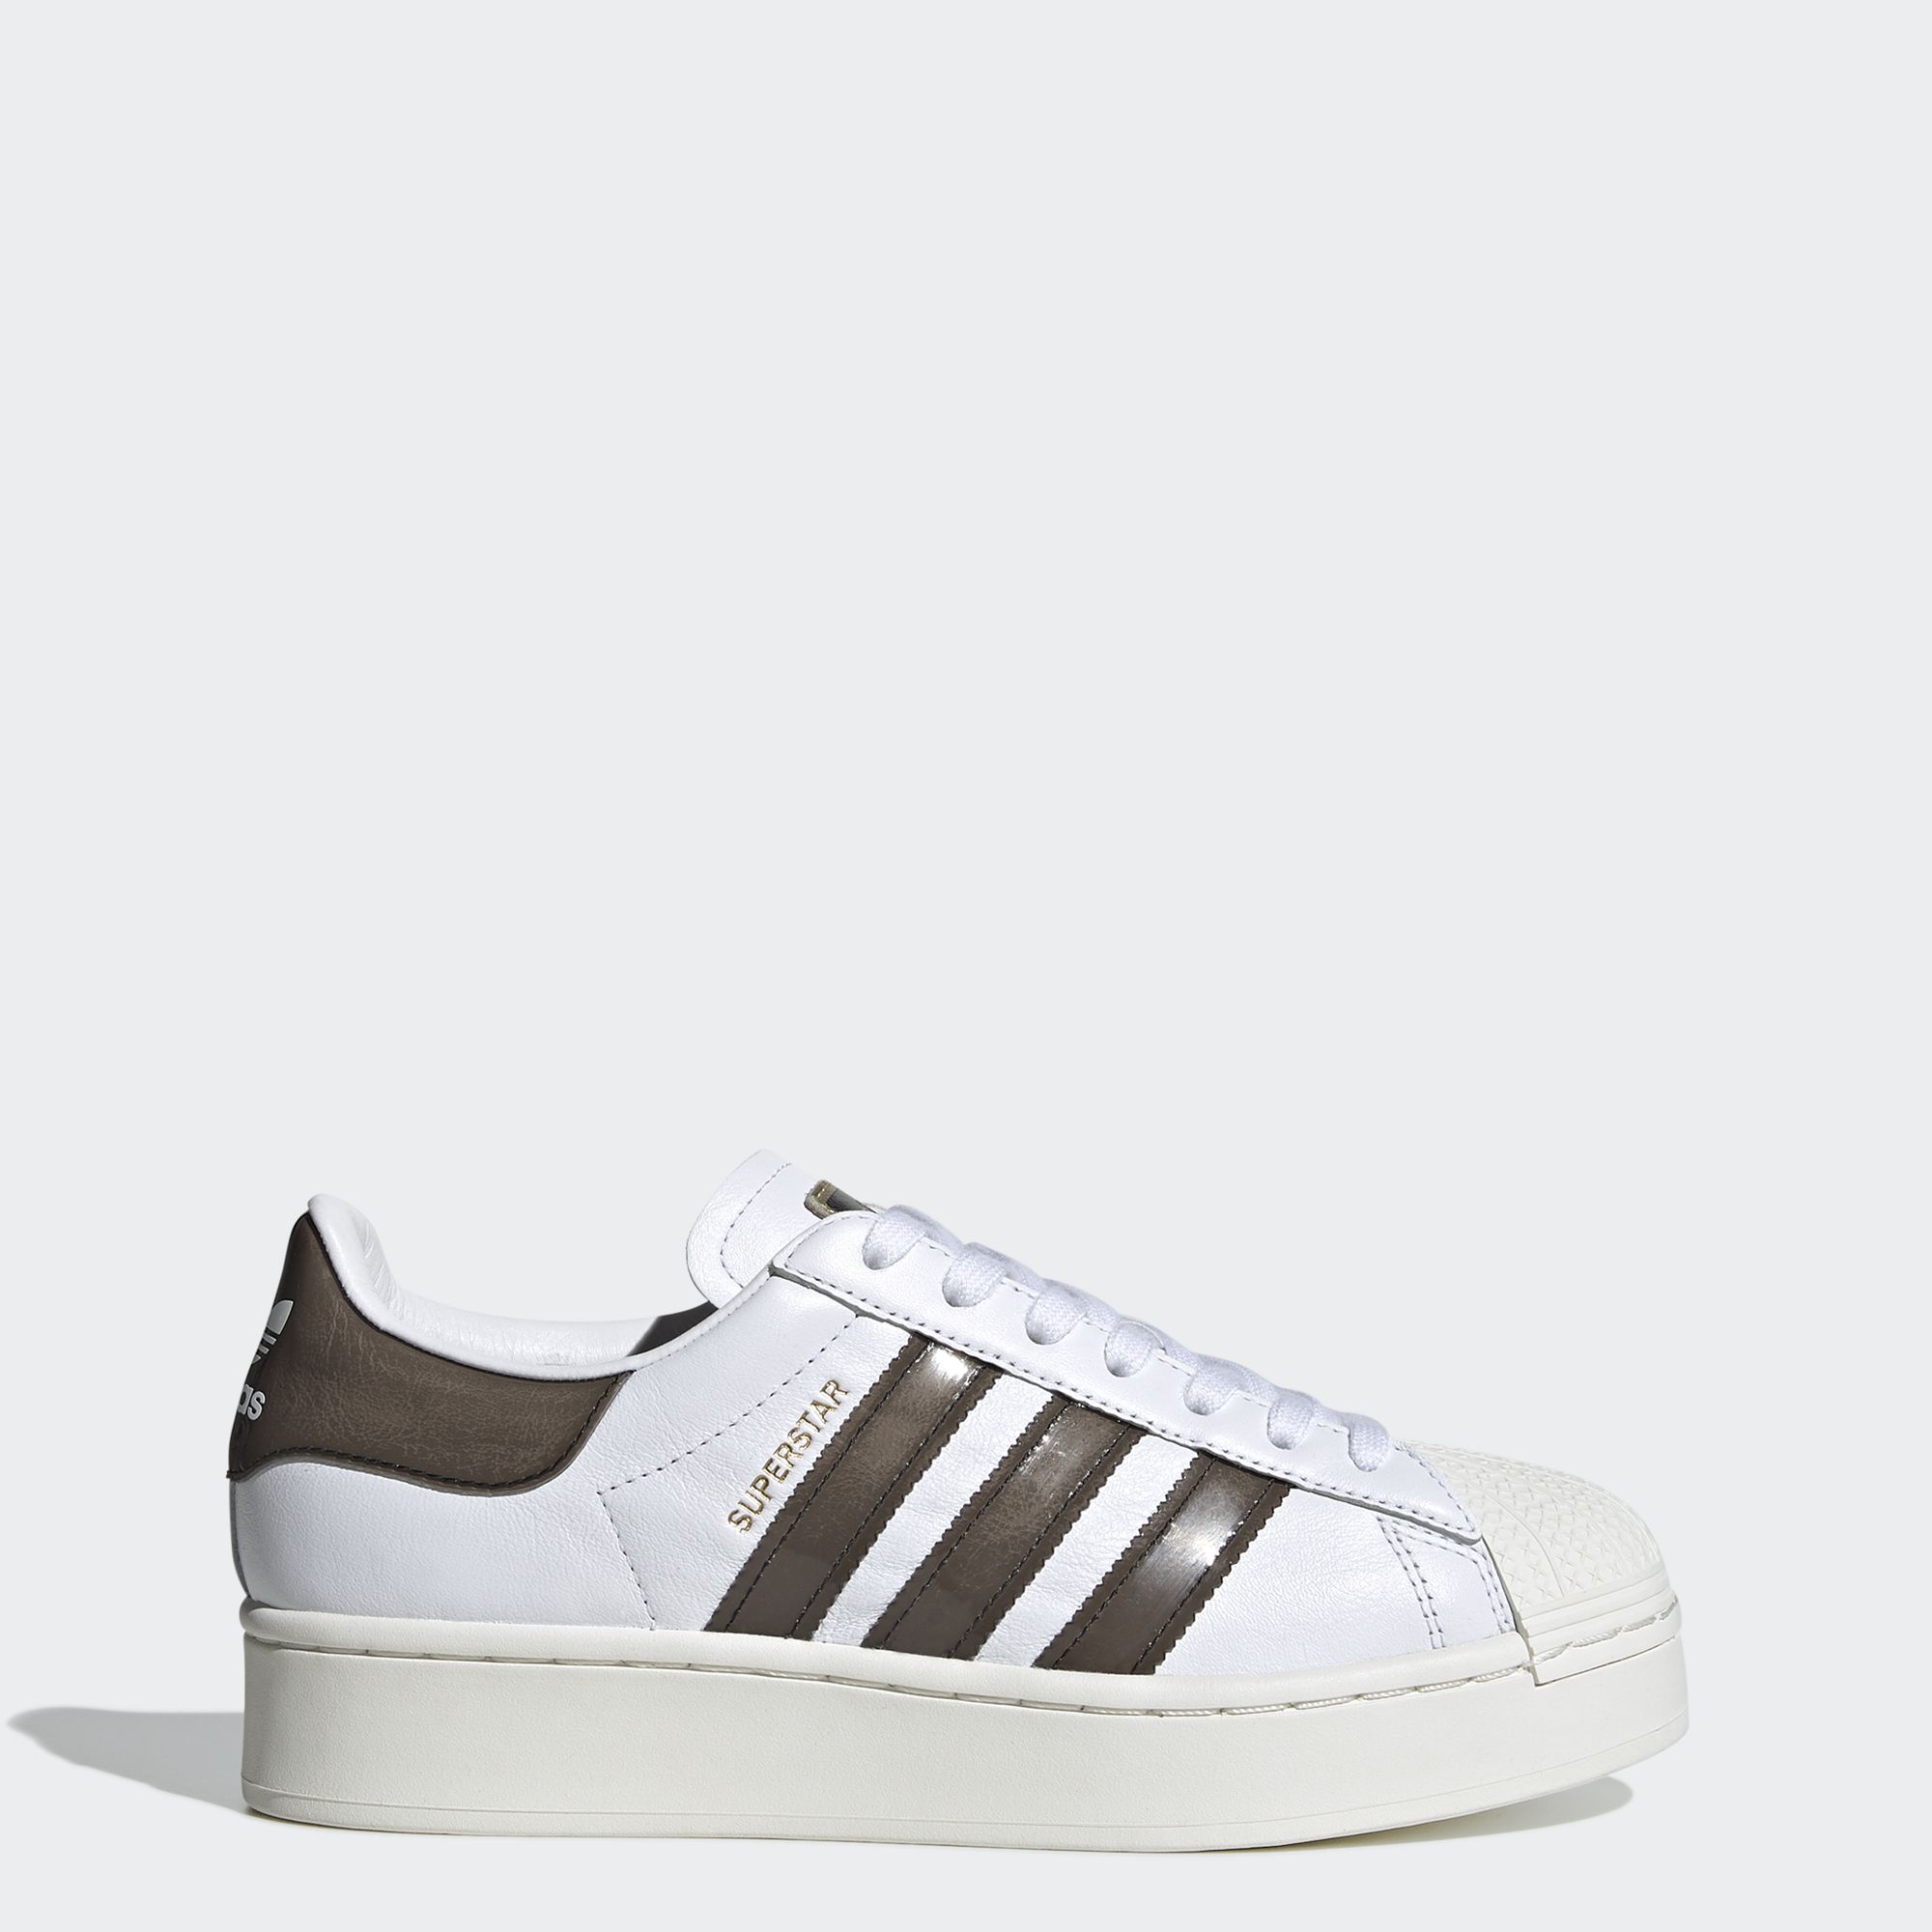 adidas shoes rate